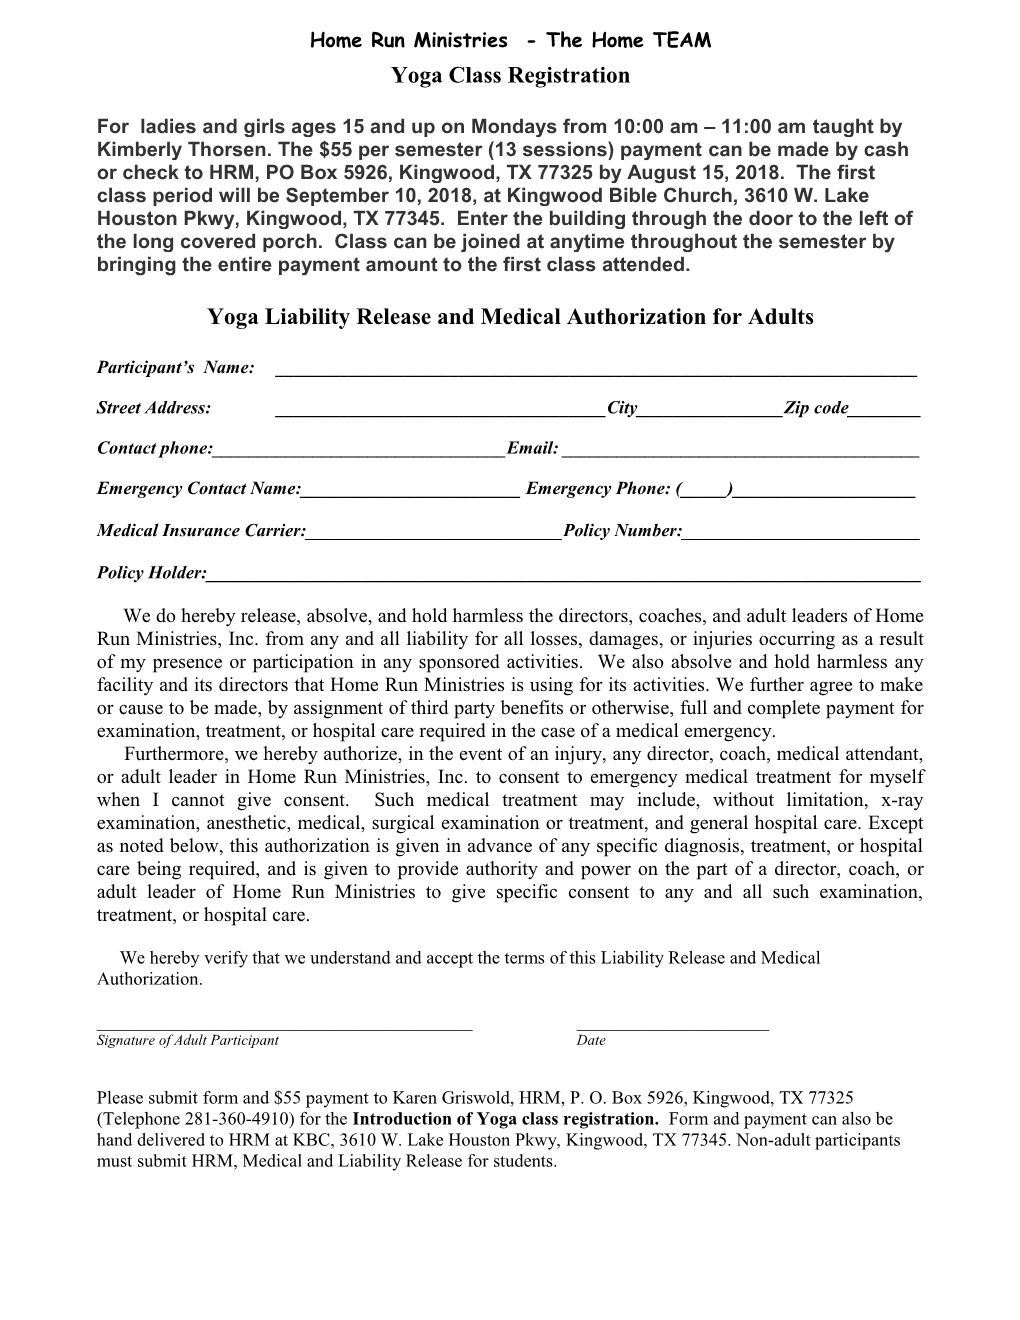 Liability Release and Medical Authorization